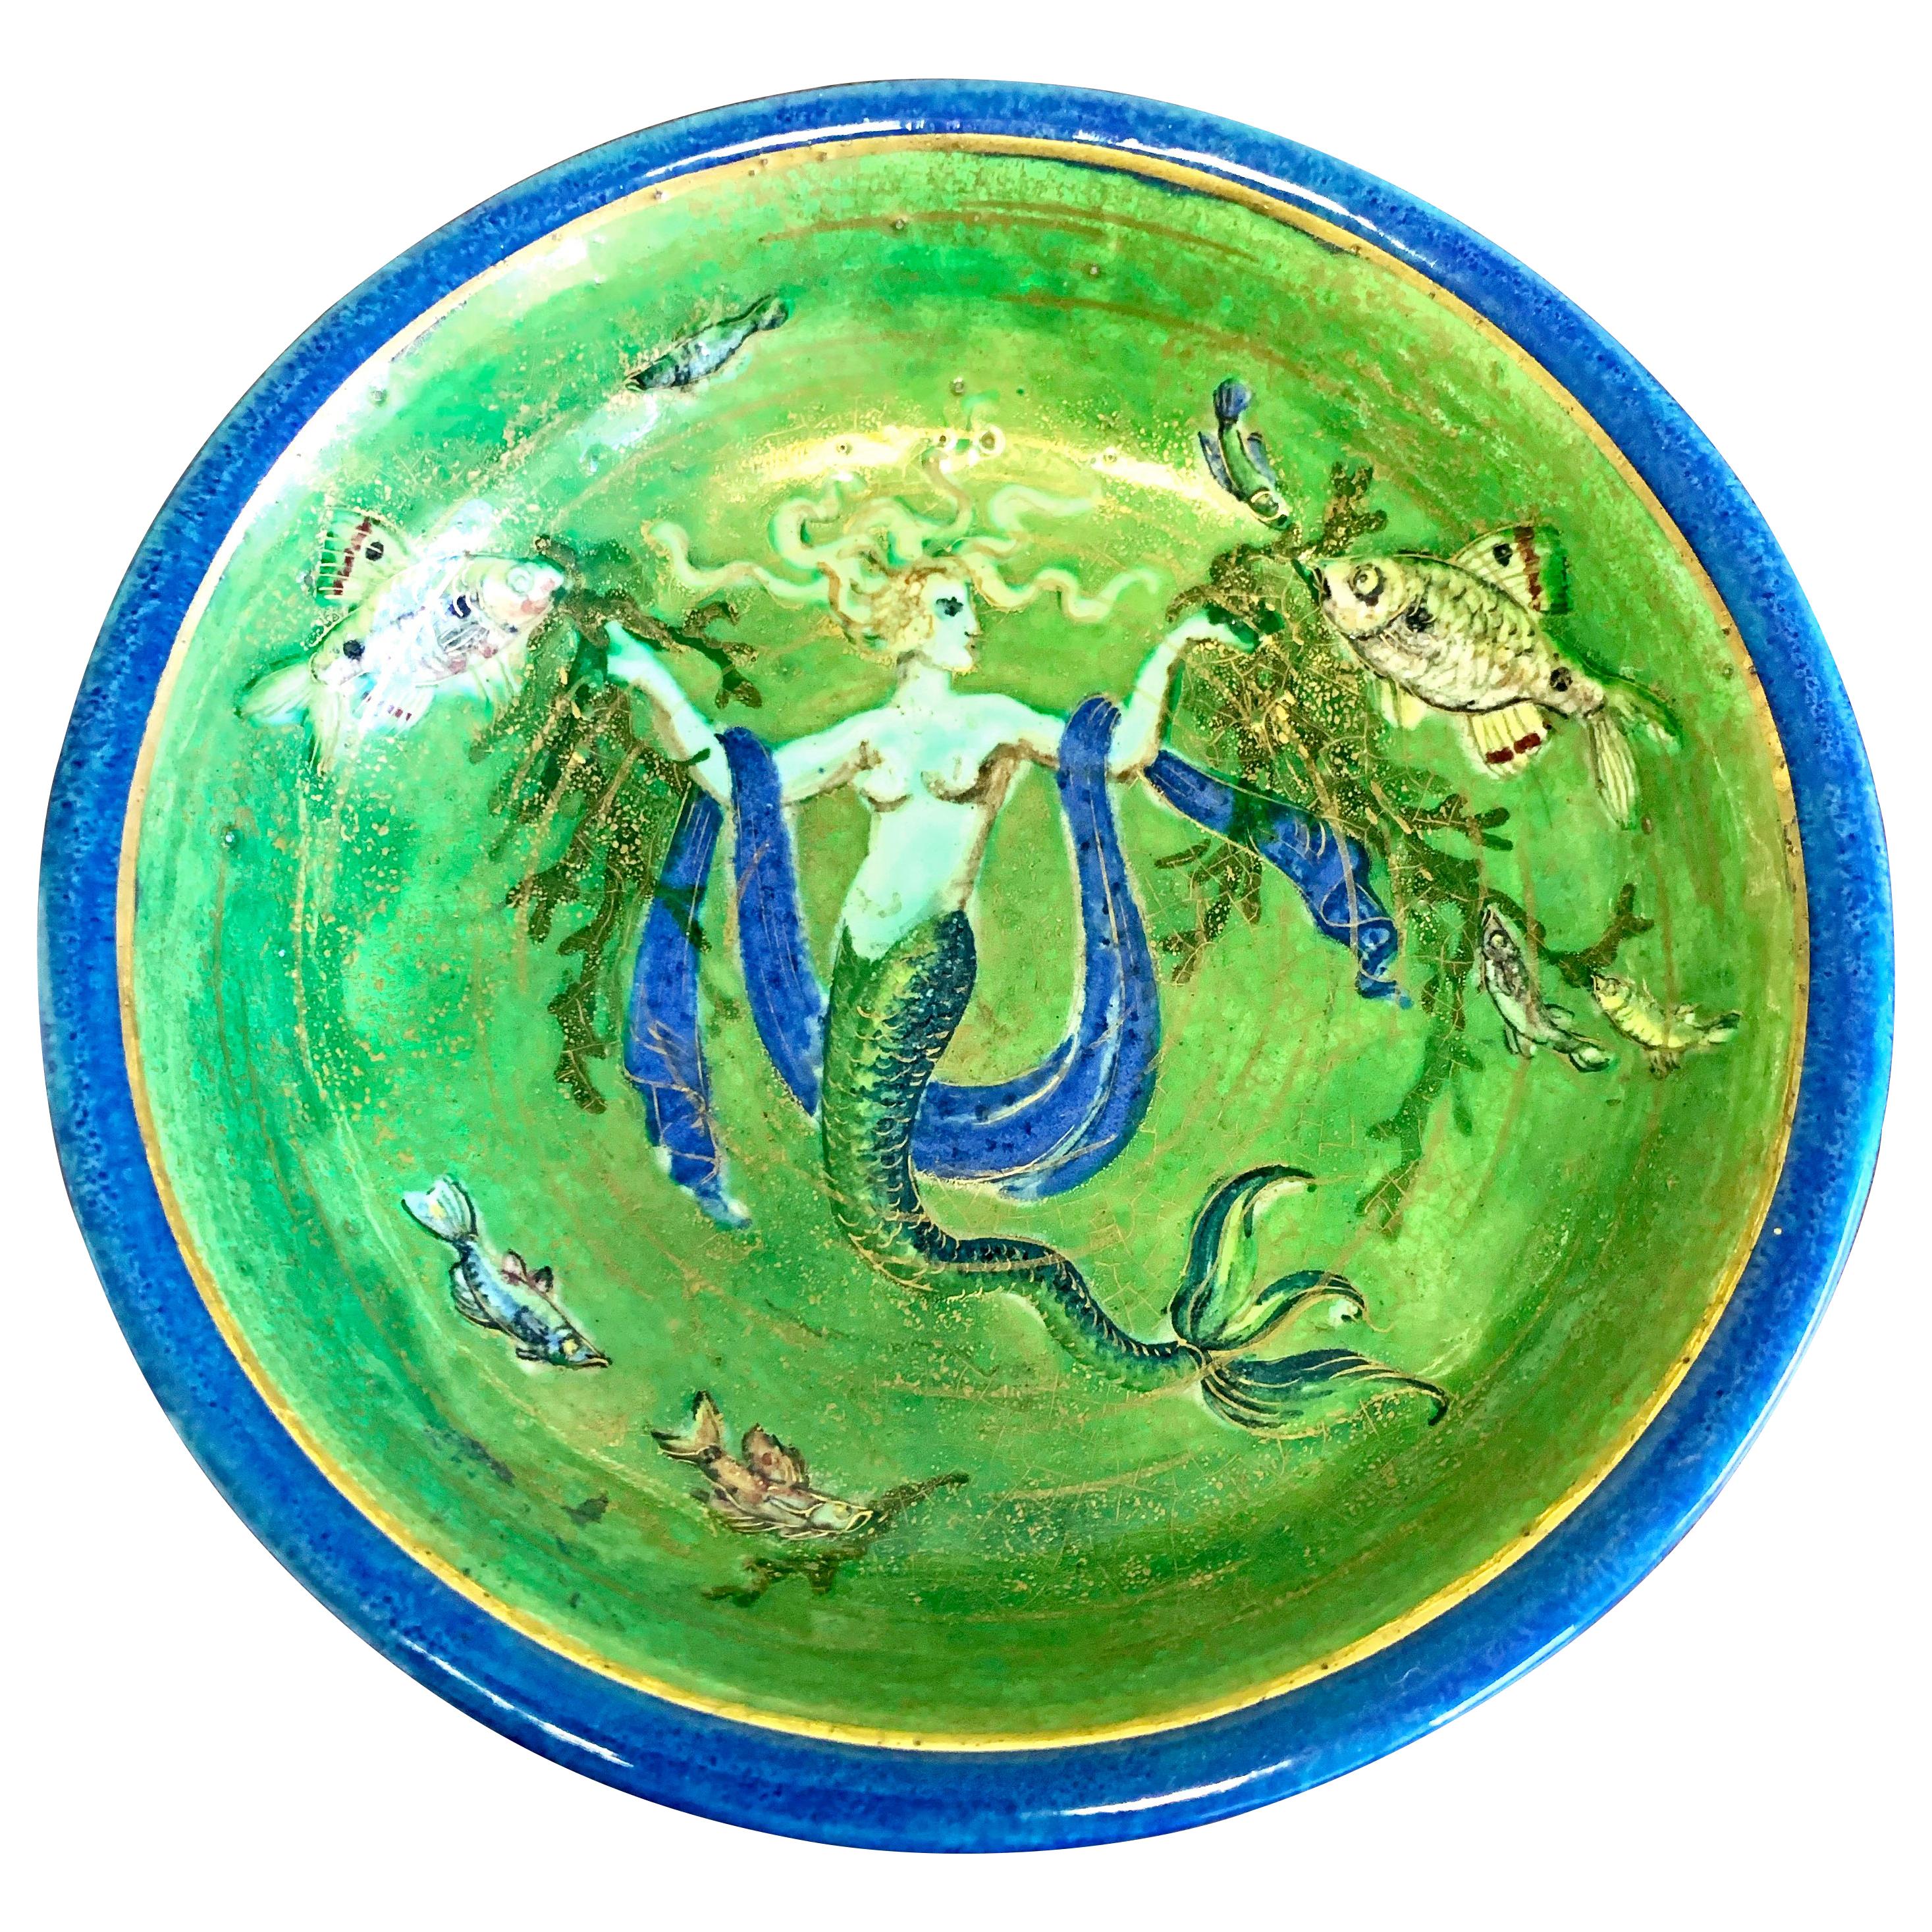 "Mermaid's Reign, " Art Deco Bowl with Underwater Scene in Emerald Green and Gold For Sale